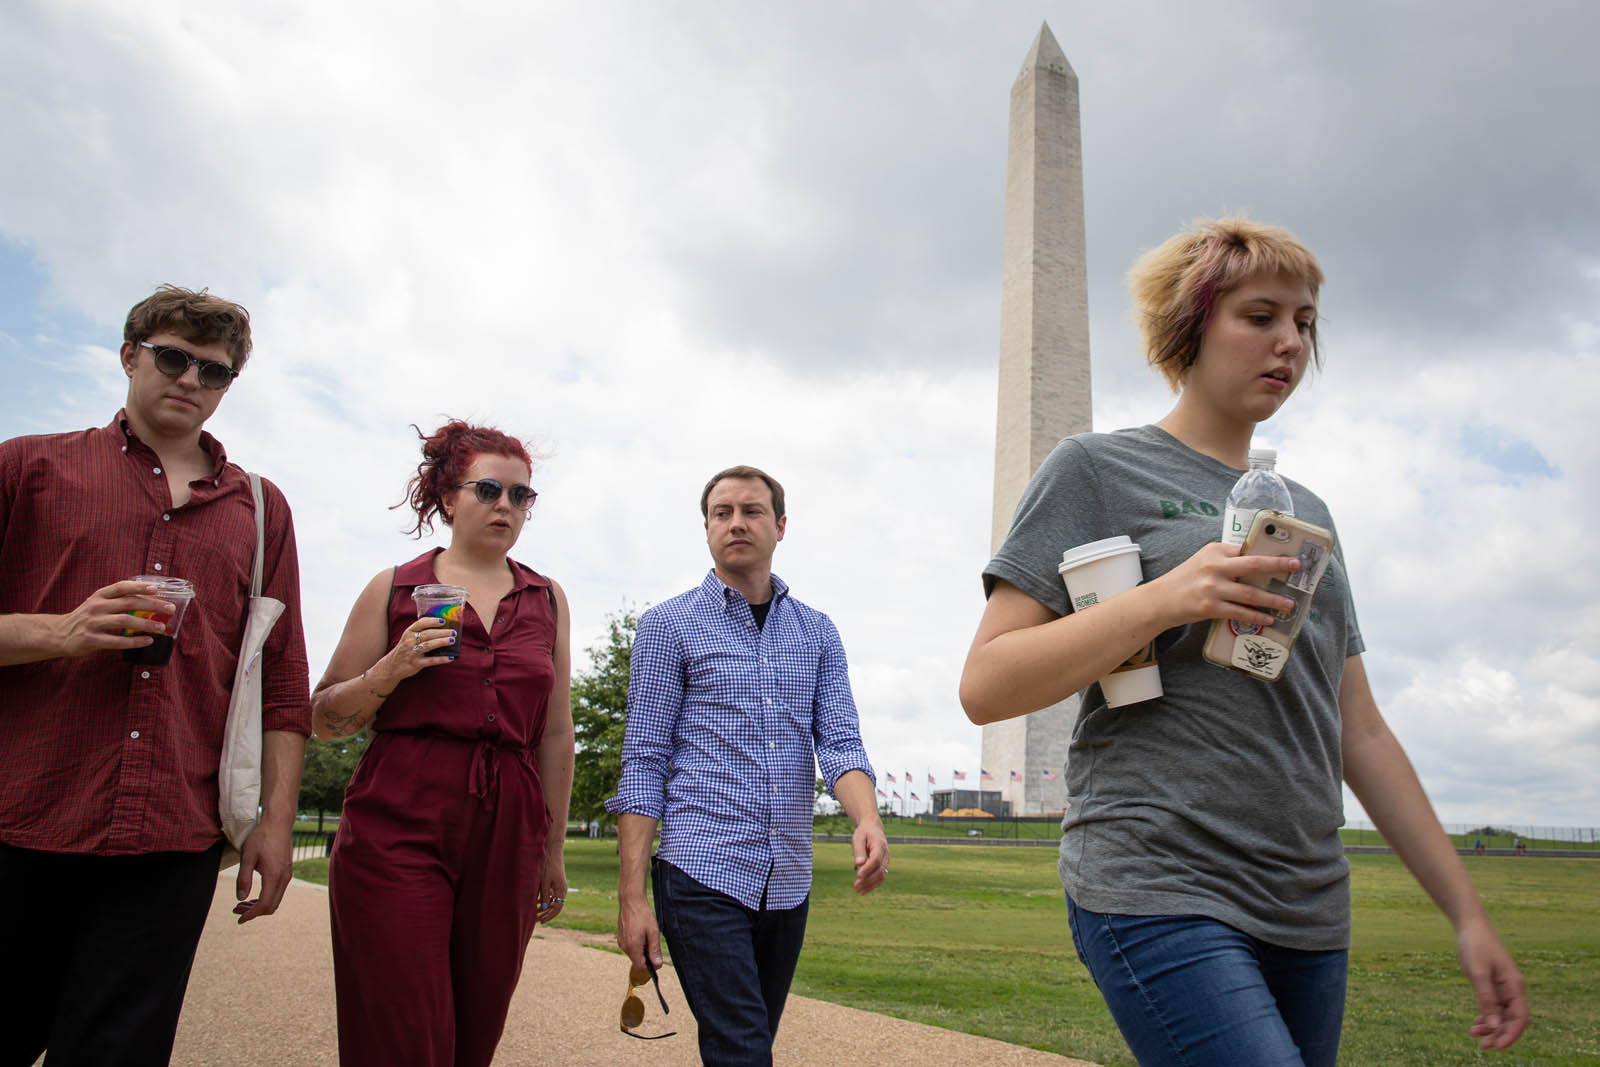 Students in the Introduction to Journalism class visit the Washington Monument in Washington, DC on June 20, 2019. Photo by Lydia Thompson.